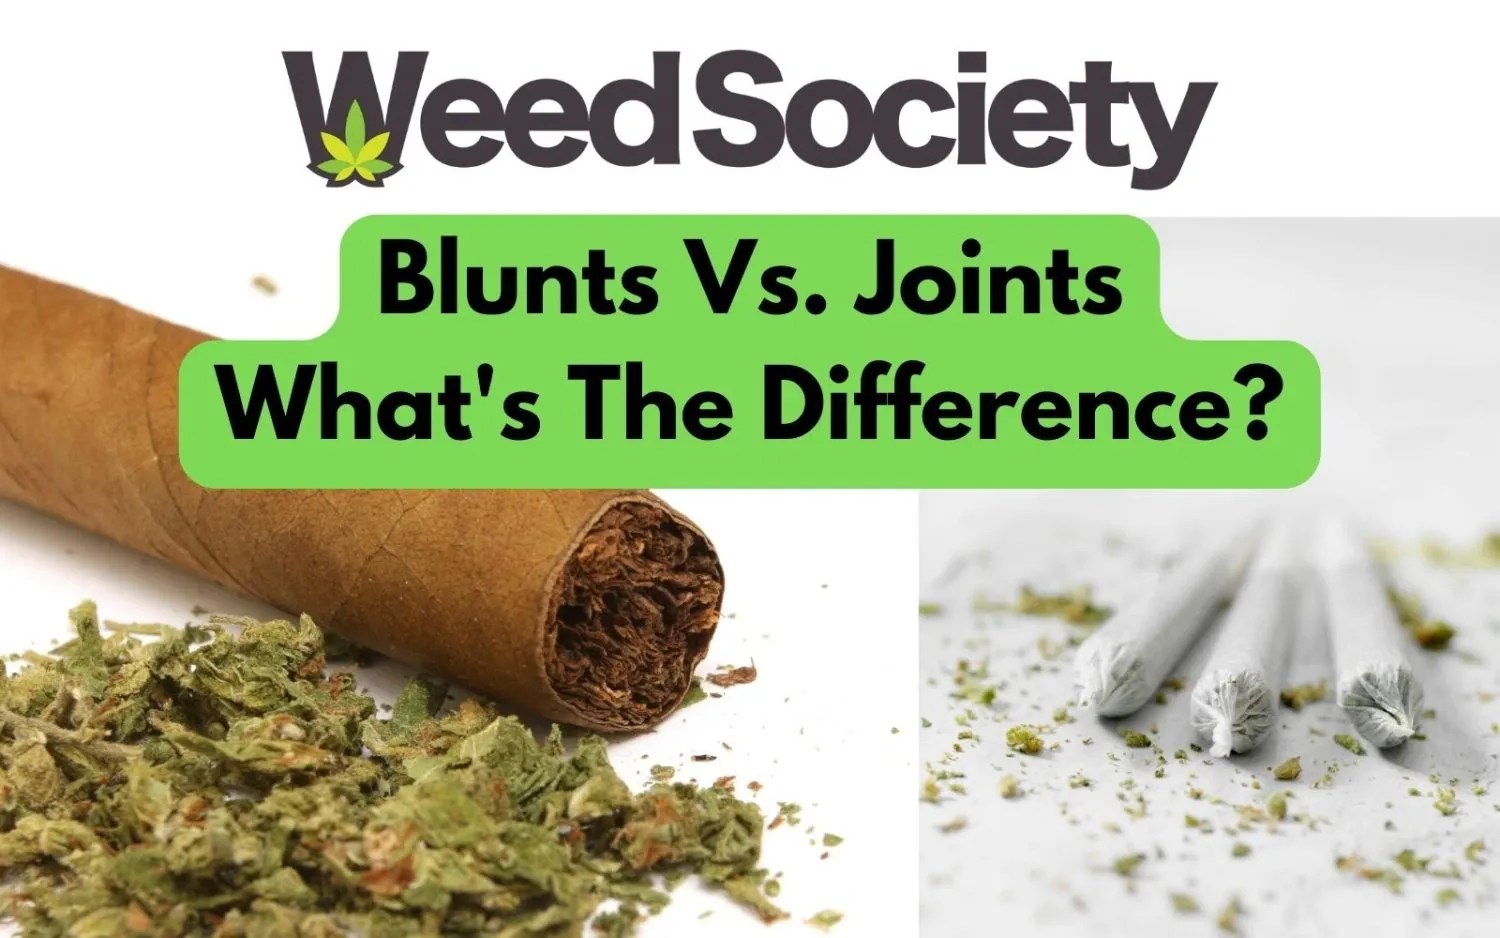 What's the Difference Between a Blunt and Joint? | WeedSociety